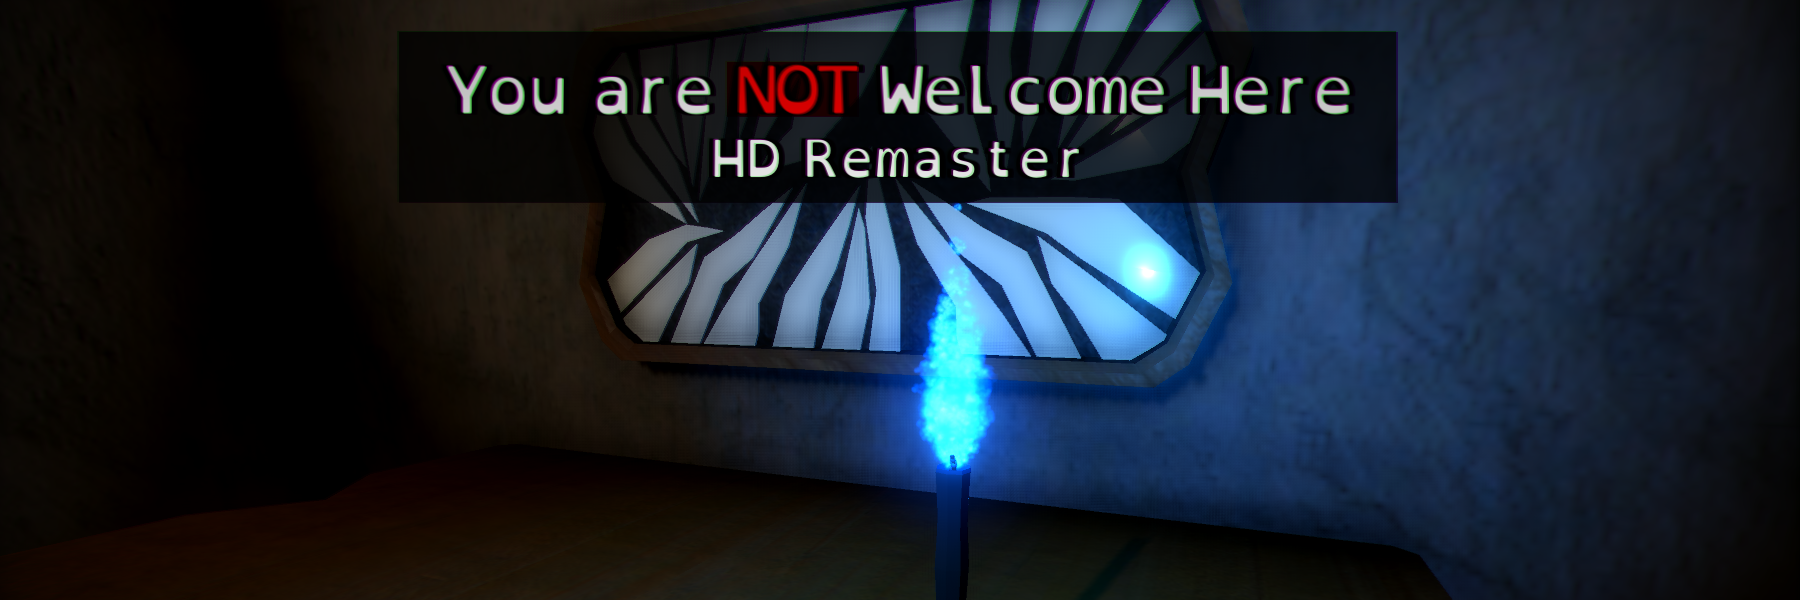 You Are Not Welcome Here - HD Remaster